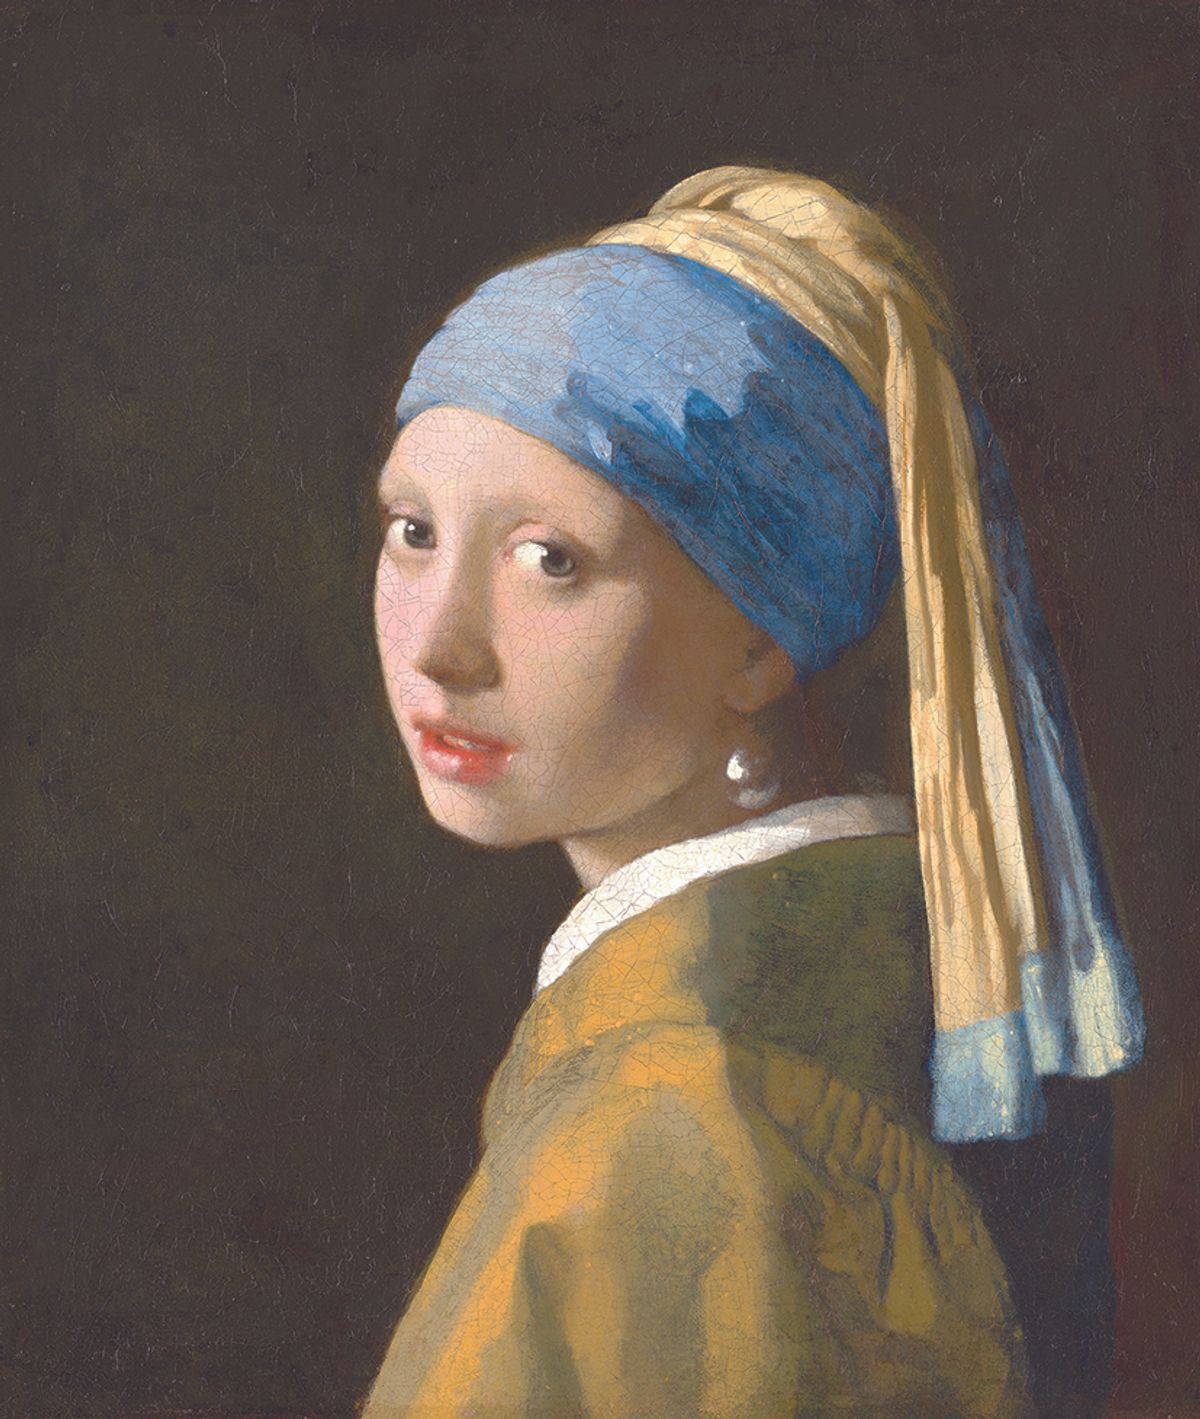 Vermeer’s most popular work, Girl With a Pearl Earring, has long captivated art lovers and scholars; new scientific analyses aim to reveal more about how it was created, and how it looked when fresh off the easel

© Margareta Svensson